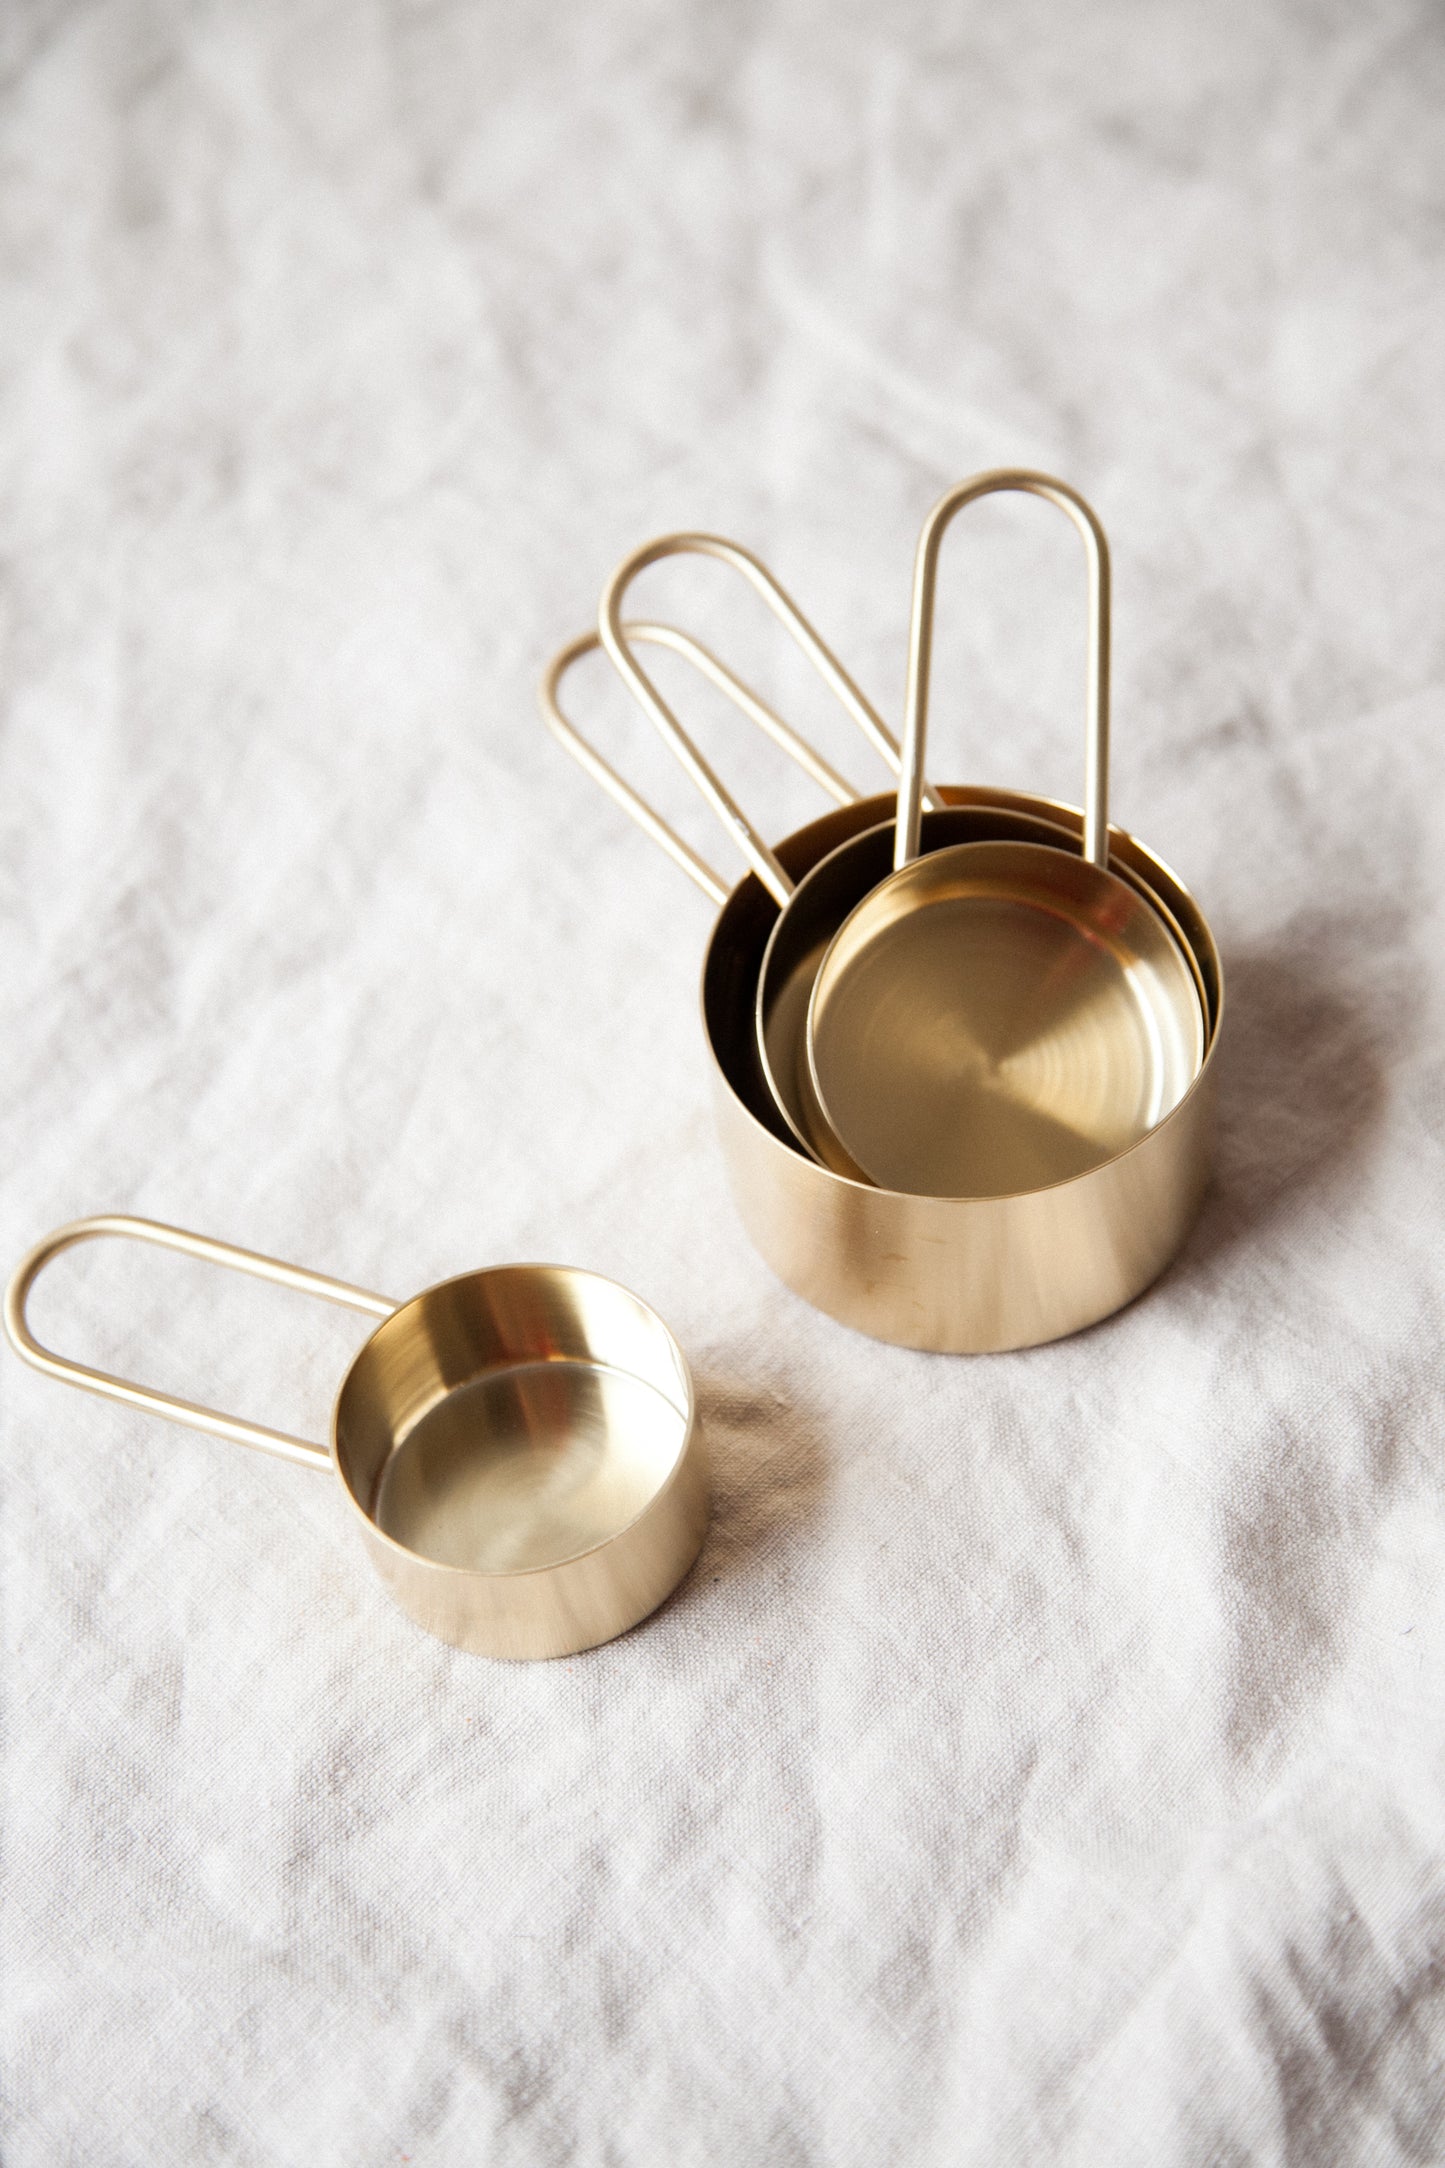 Kitchen Pantry 4pc Brass Measuring Cups